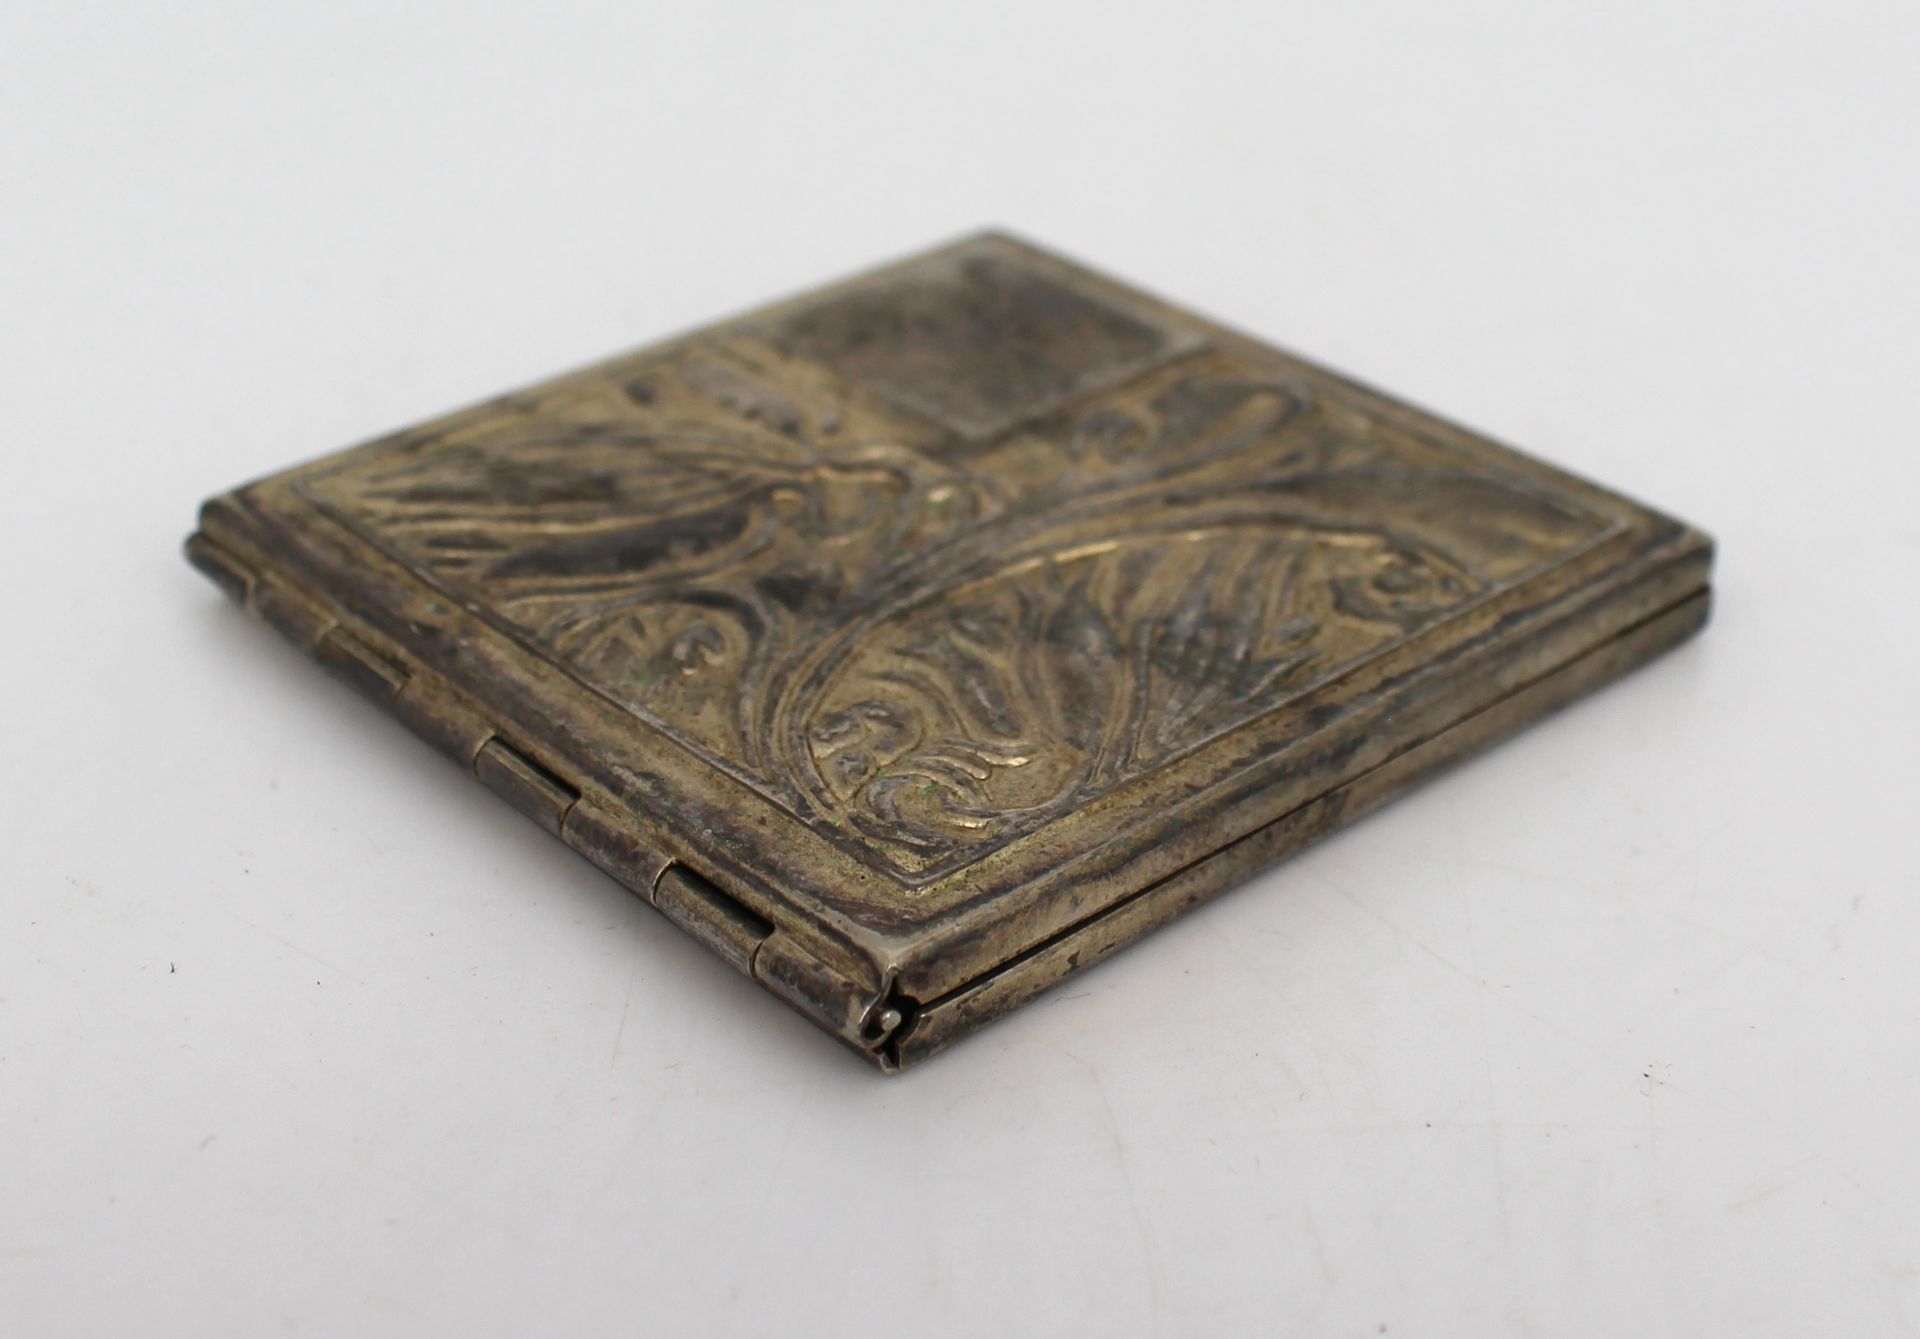 Vintage Silver Plated Art Nouveau Style Compact - Image 4 of 4